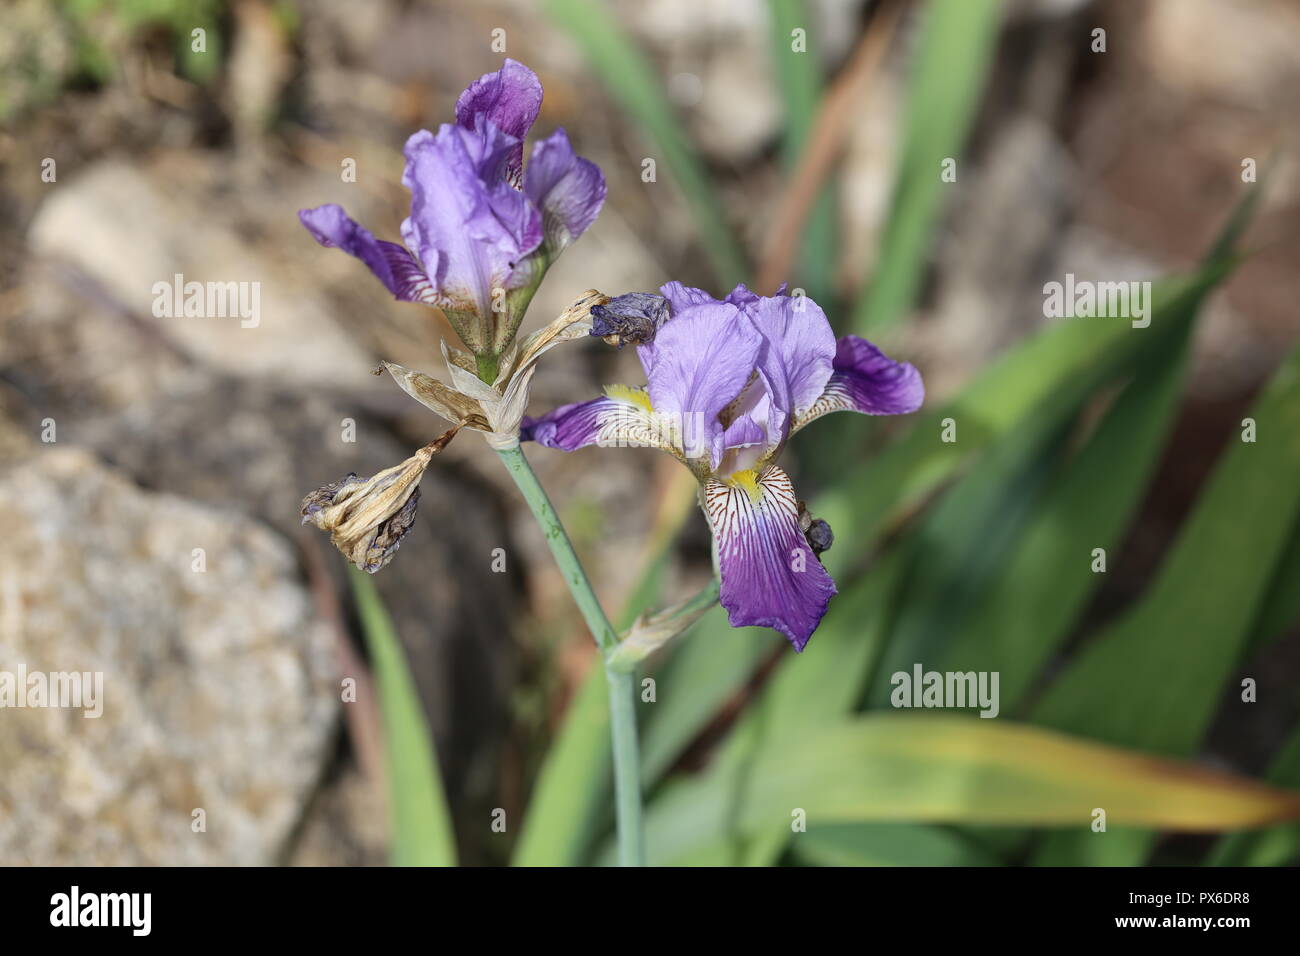 Wild Iris. Wild iris flowers blooming near a rock terrace. One flower is already wilt - The cycle of life. Stock Photo